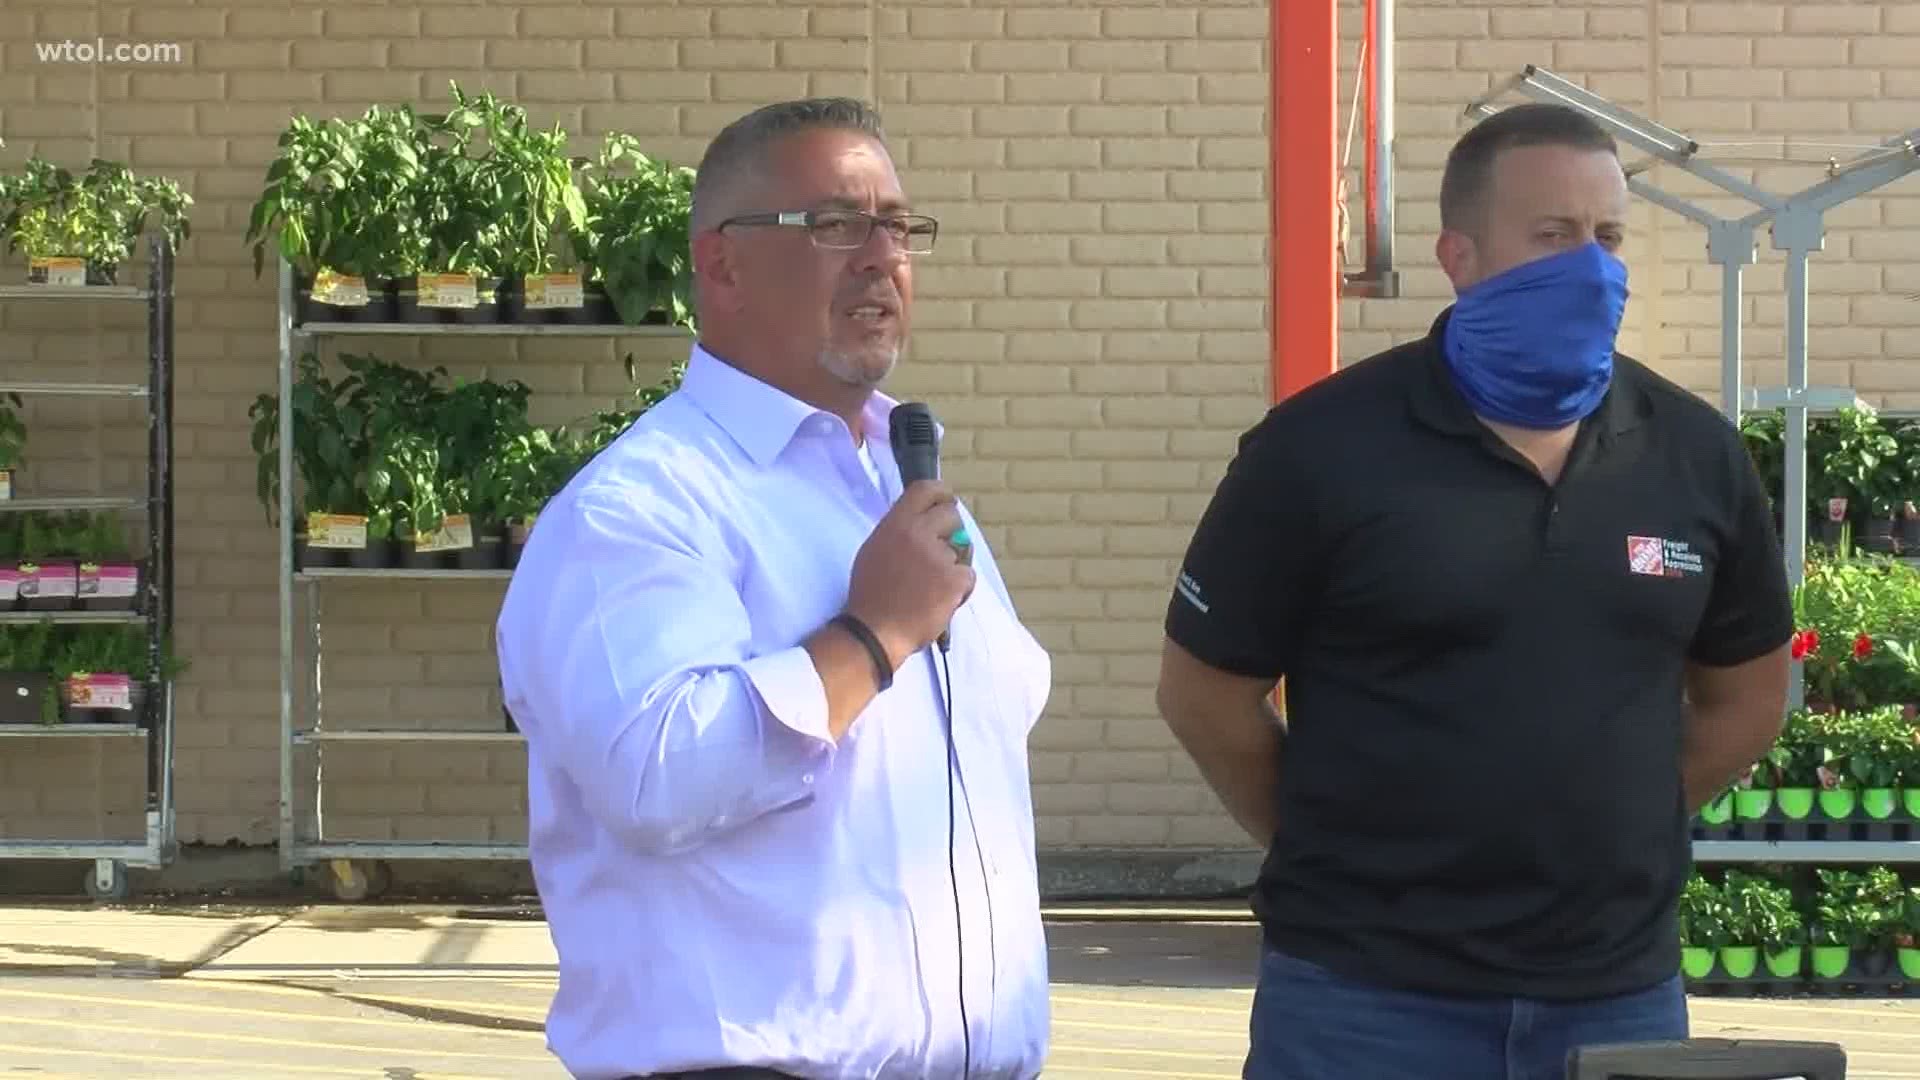 The father of slain Toledo Police Officer Anthony Dia announced his interest at an event Thursday night at the Home Depot parking lot where his son was killed July 4